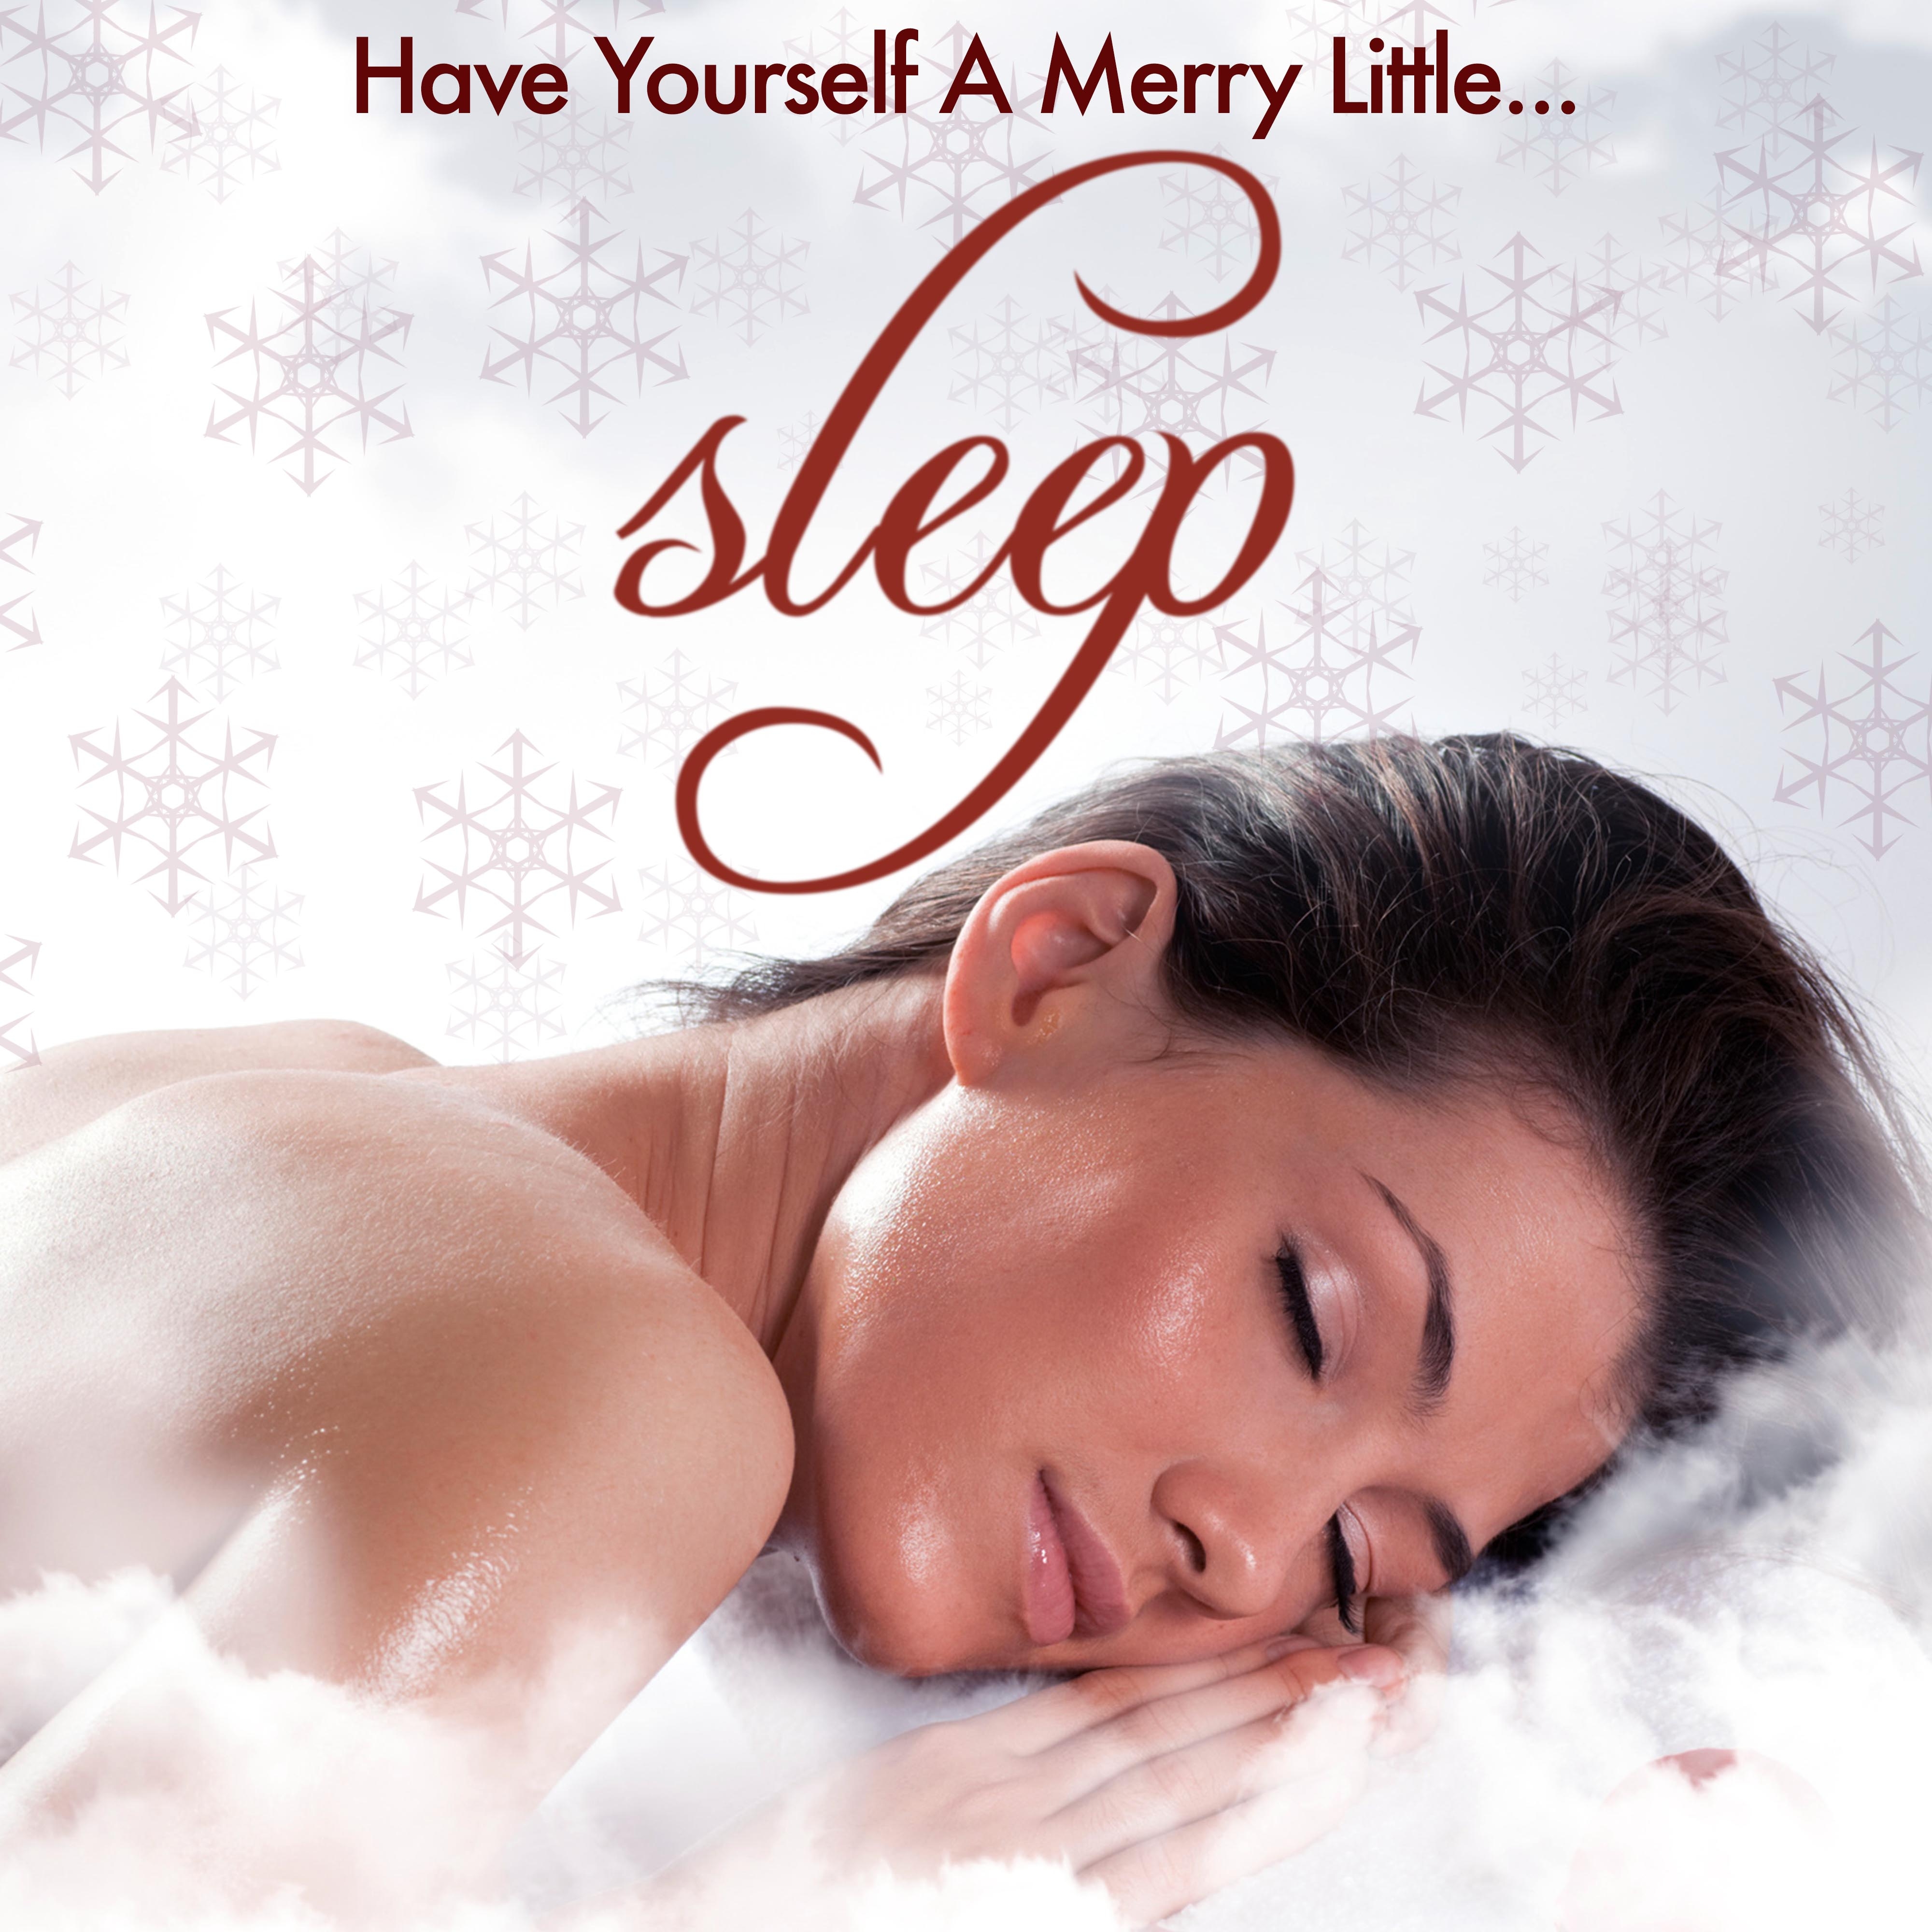 Have Yourself A Merry Little Sleep: Top Calming Lullabies for Babies and Pregnant Mothers to Soothe the Mind and Find Peace and Serenity